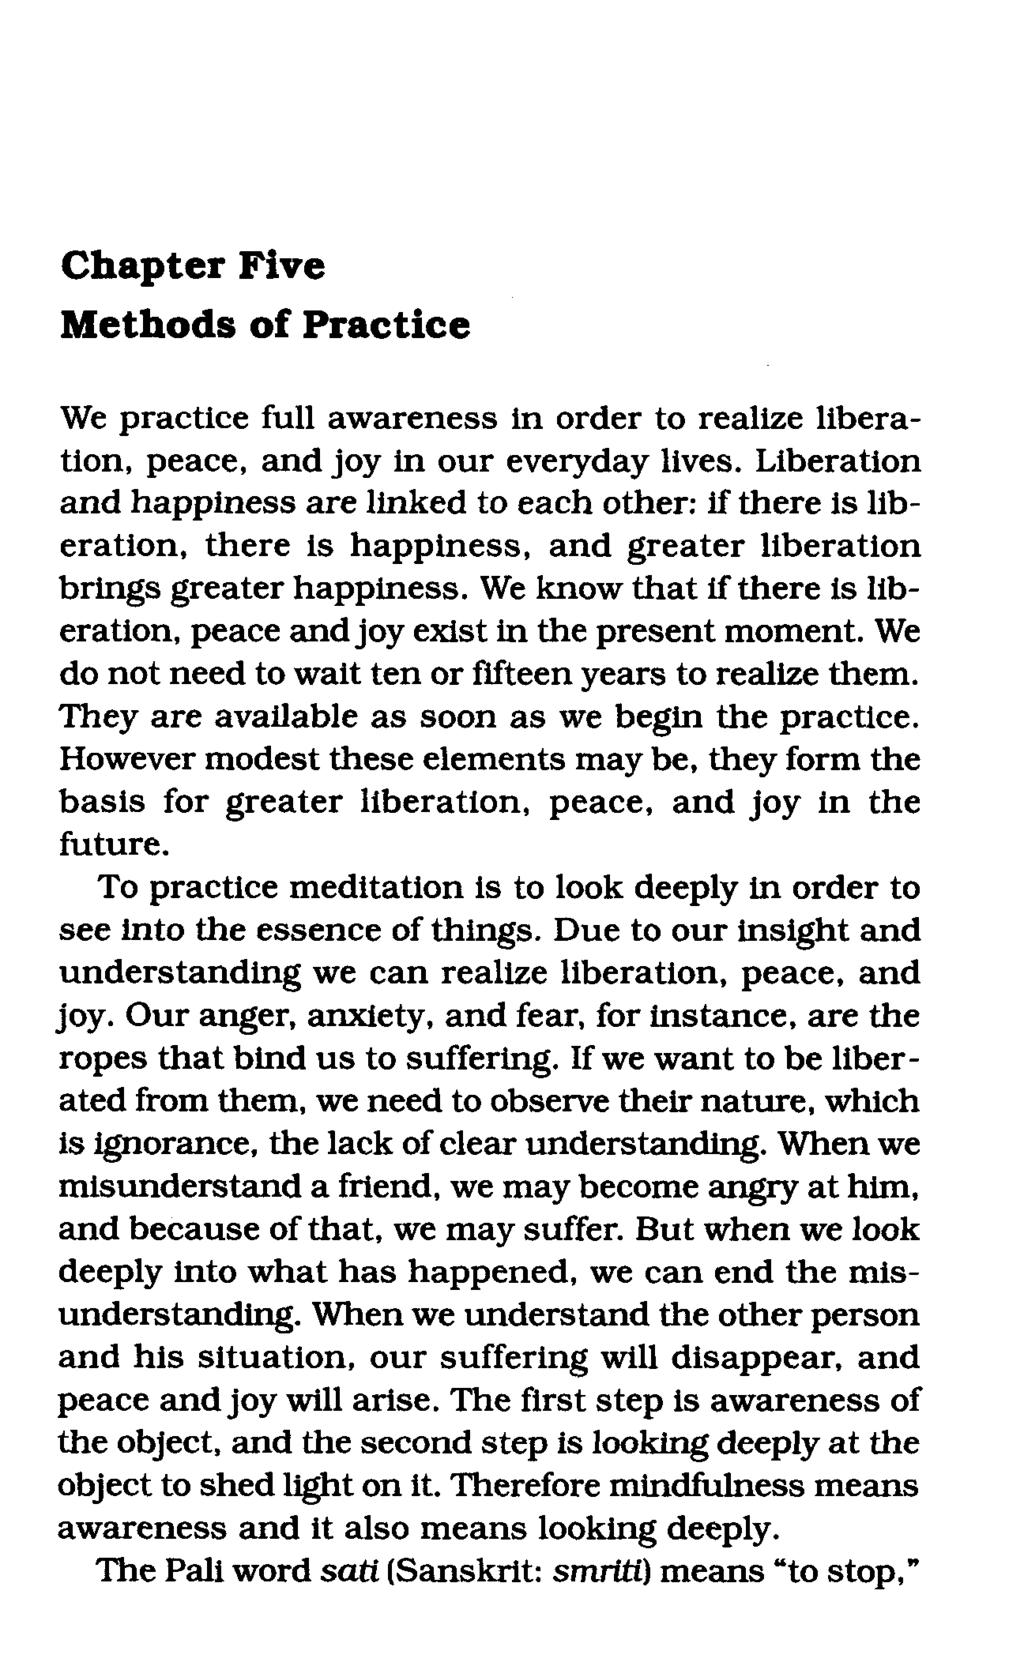 Chapter Five Methods of Practice We practice full awareness in order to realize liberation, peace, and joy in our everyday lives.